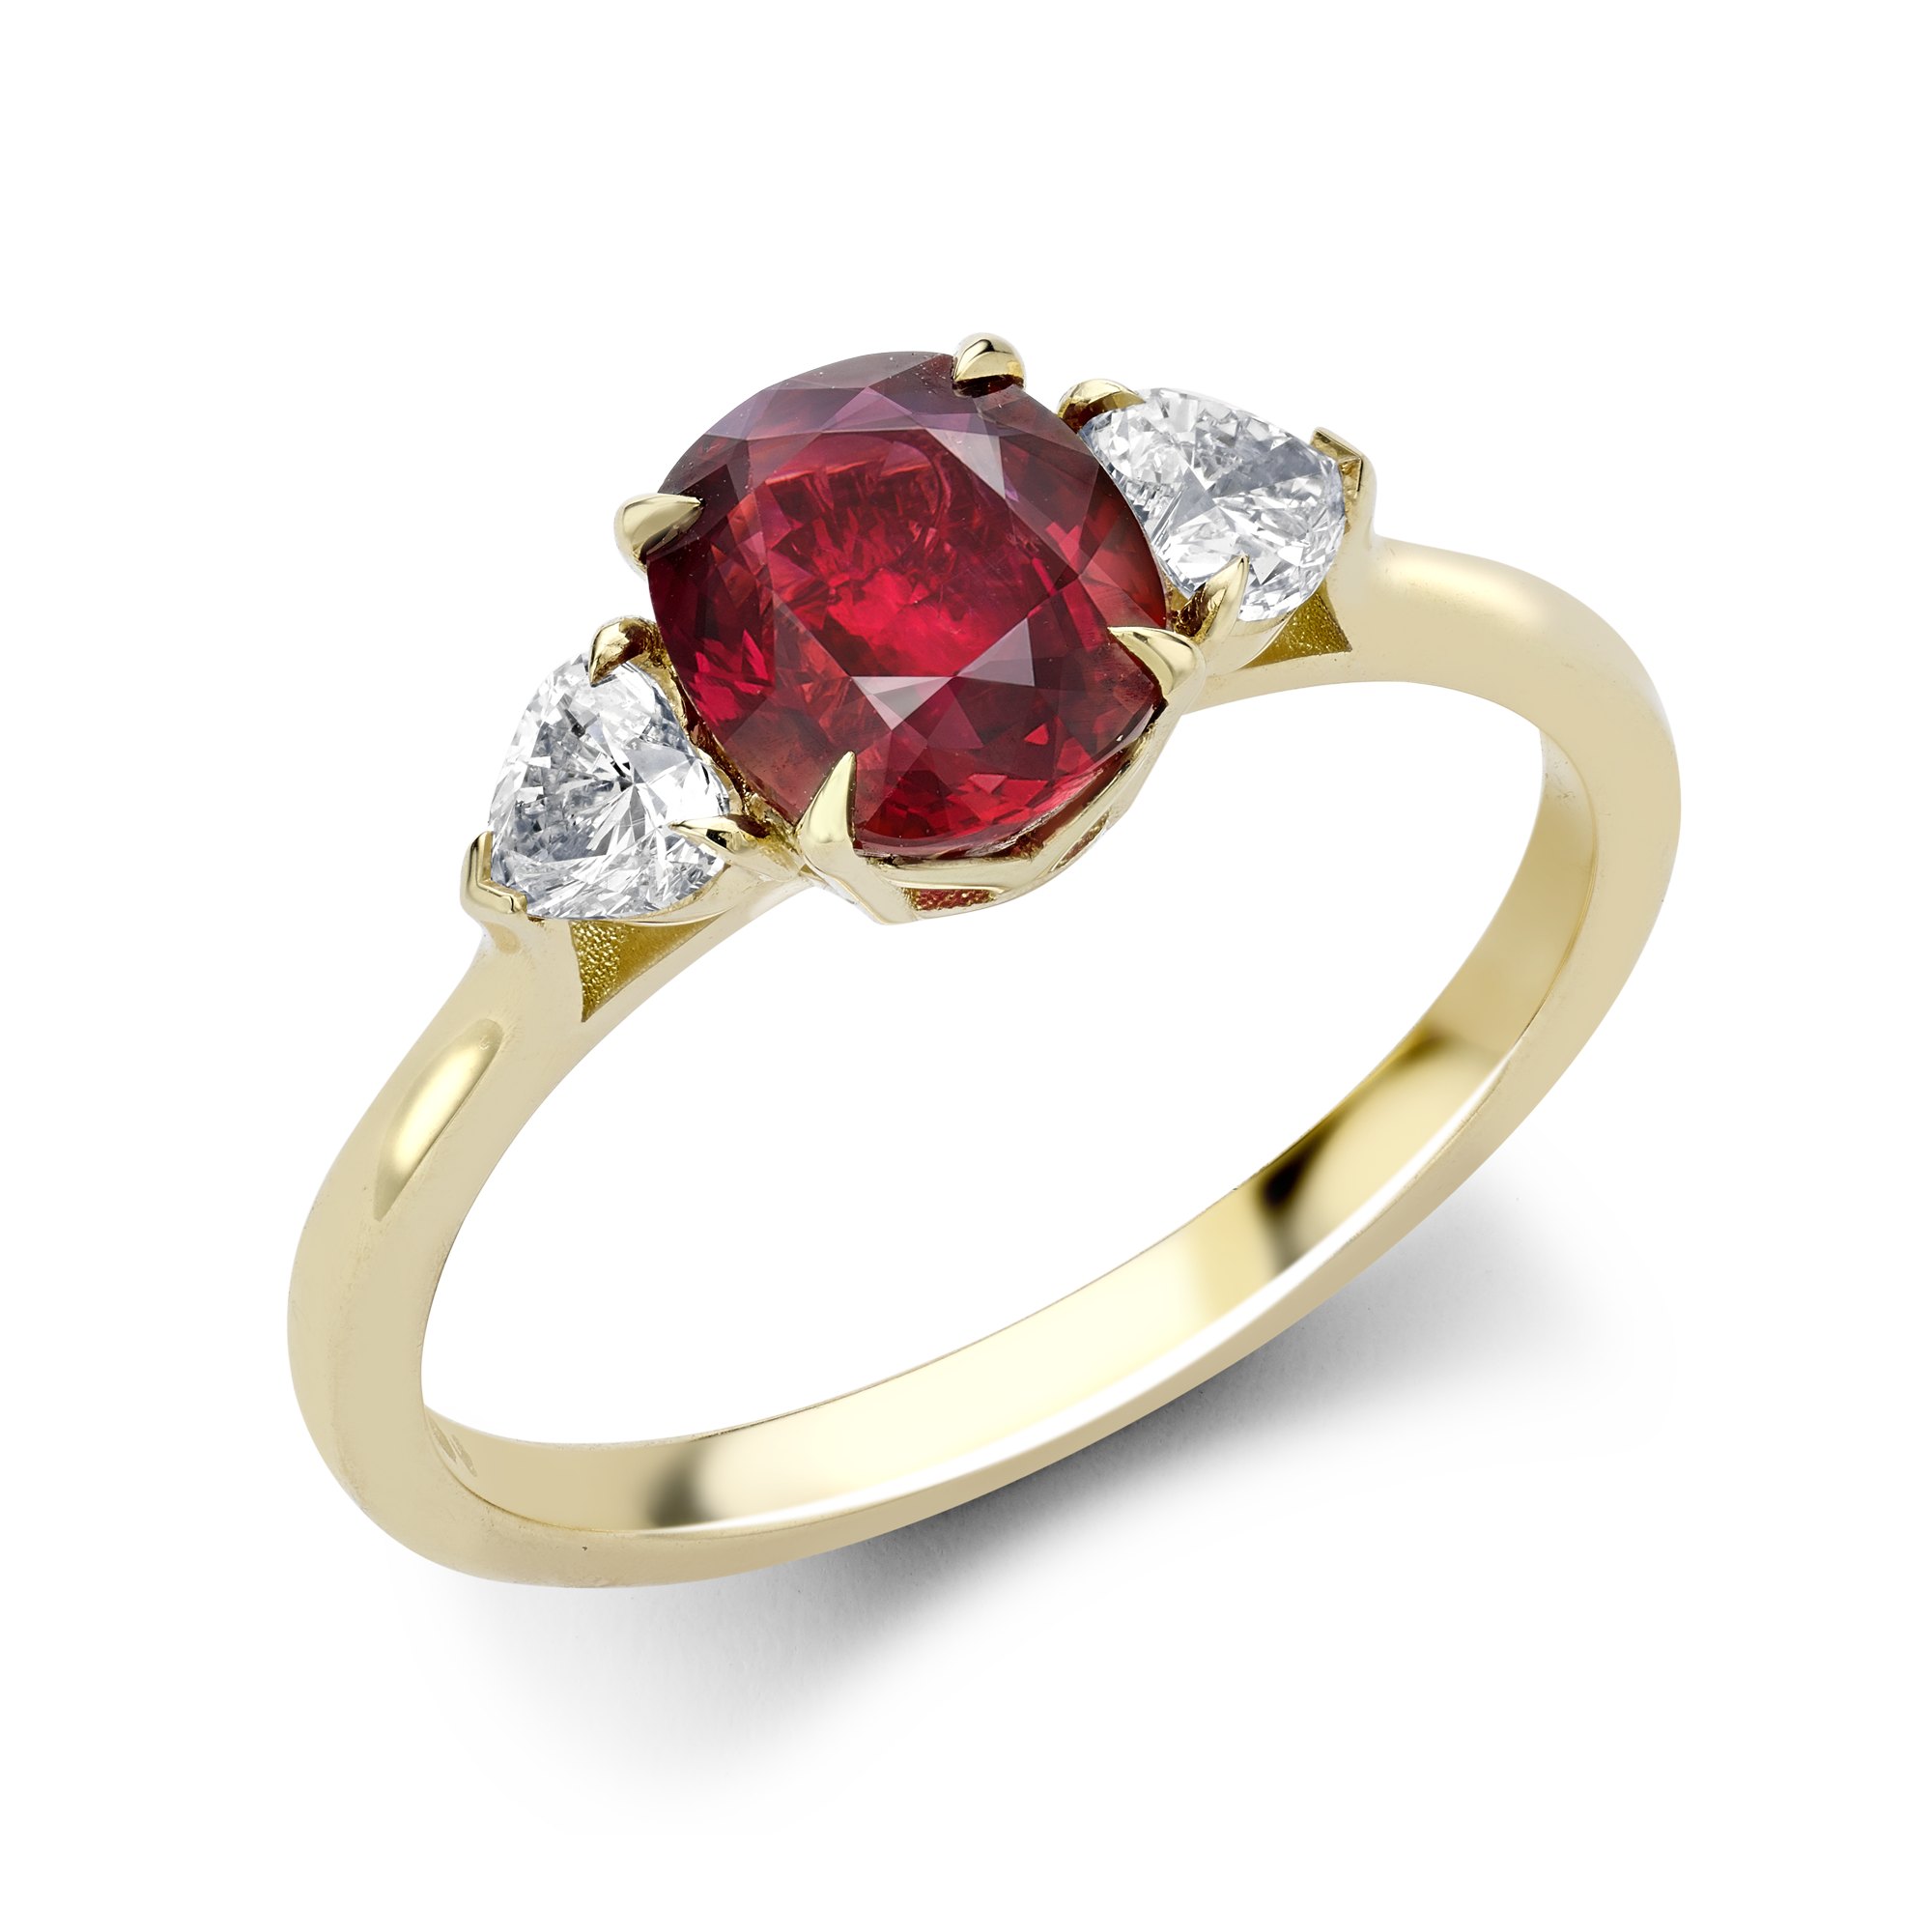 Mozambique 1.76ct Pigeon Blood Red Ruby and Diamond Three Stone Ring Oval Cushion Cut, Claw Set_1